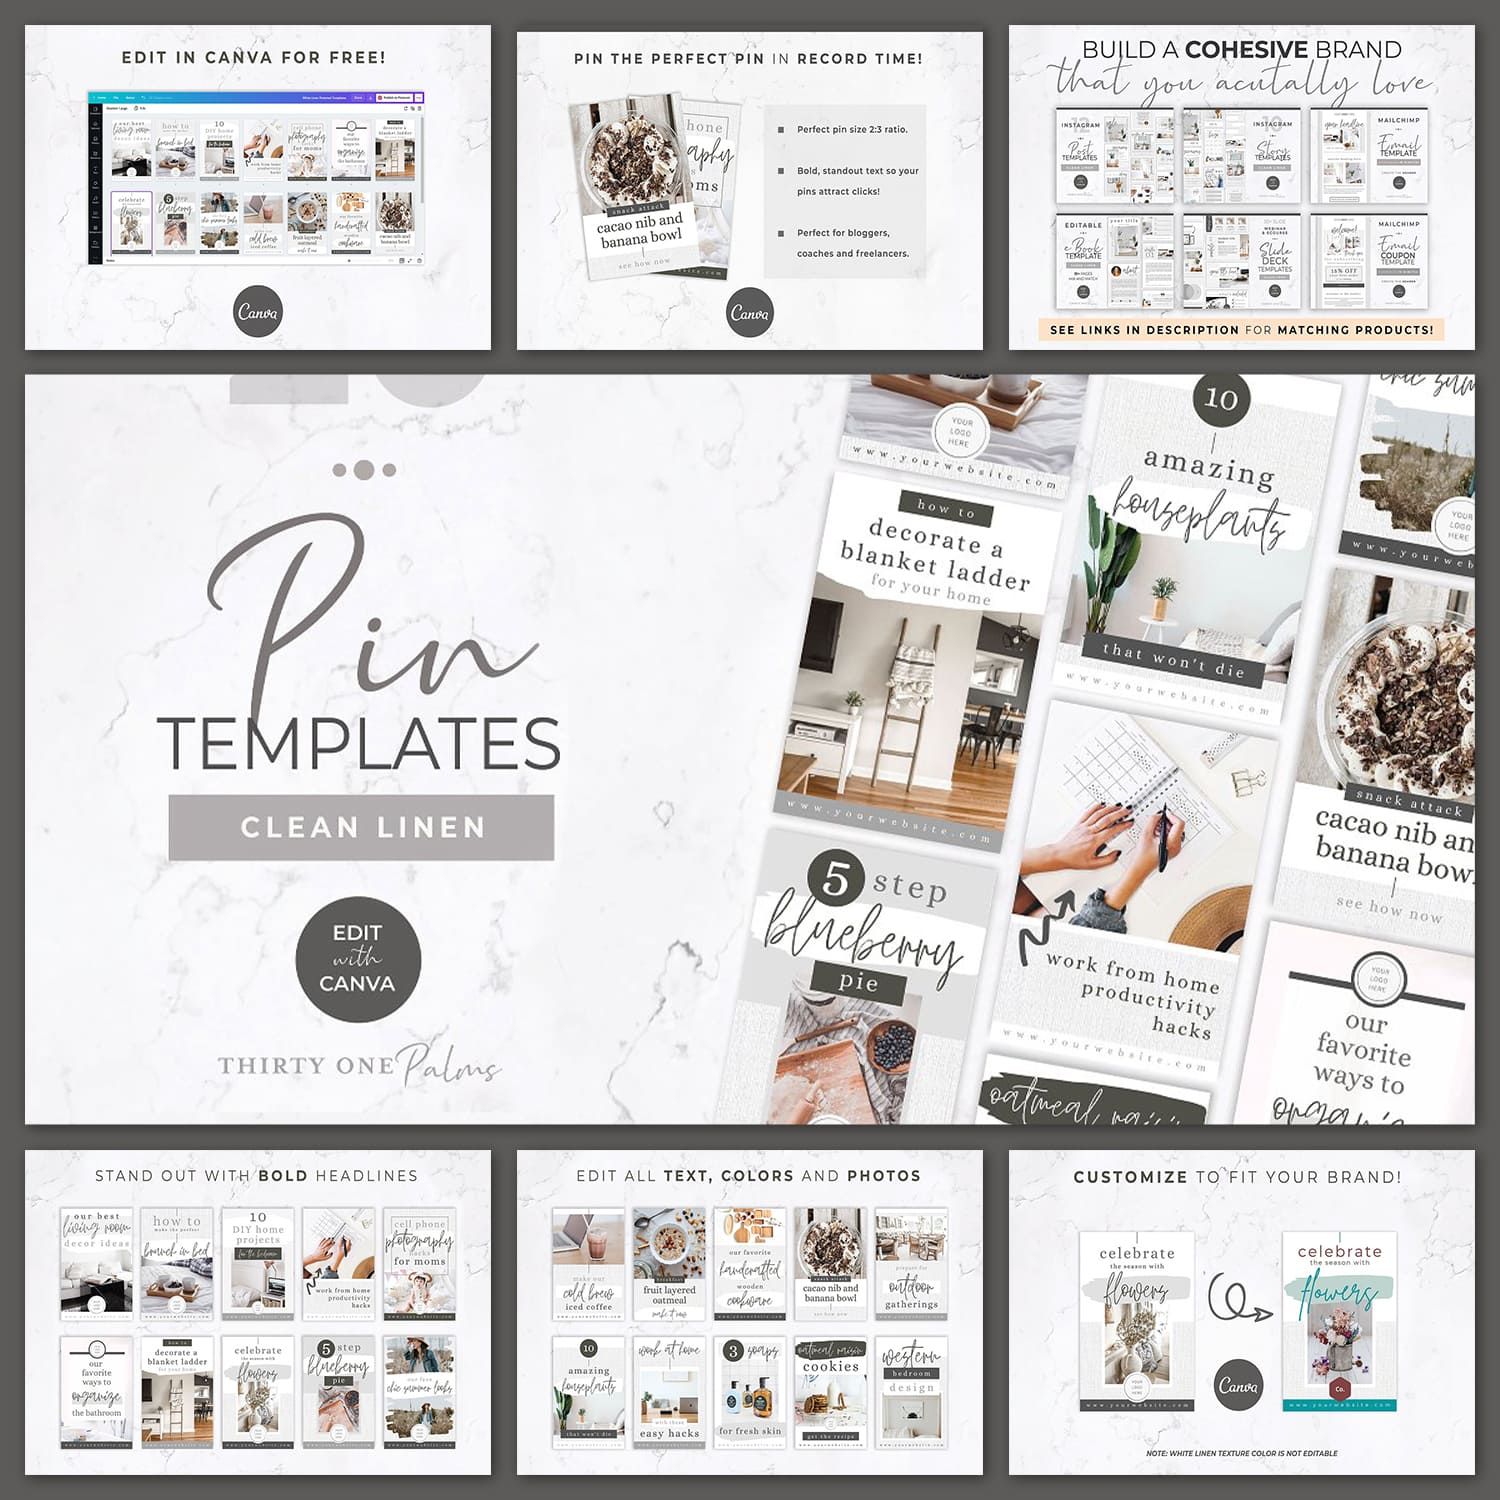 Pin Templates - Clean Linen - "Edit With Canva".